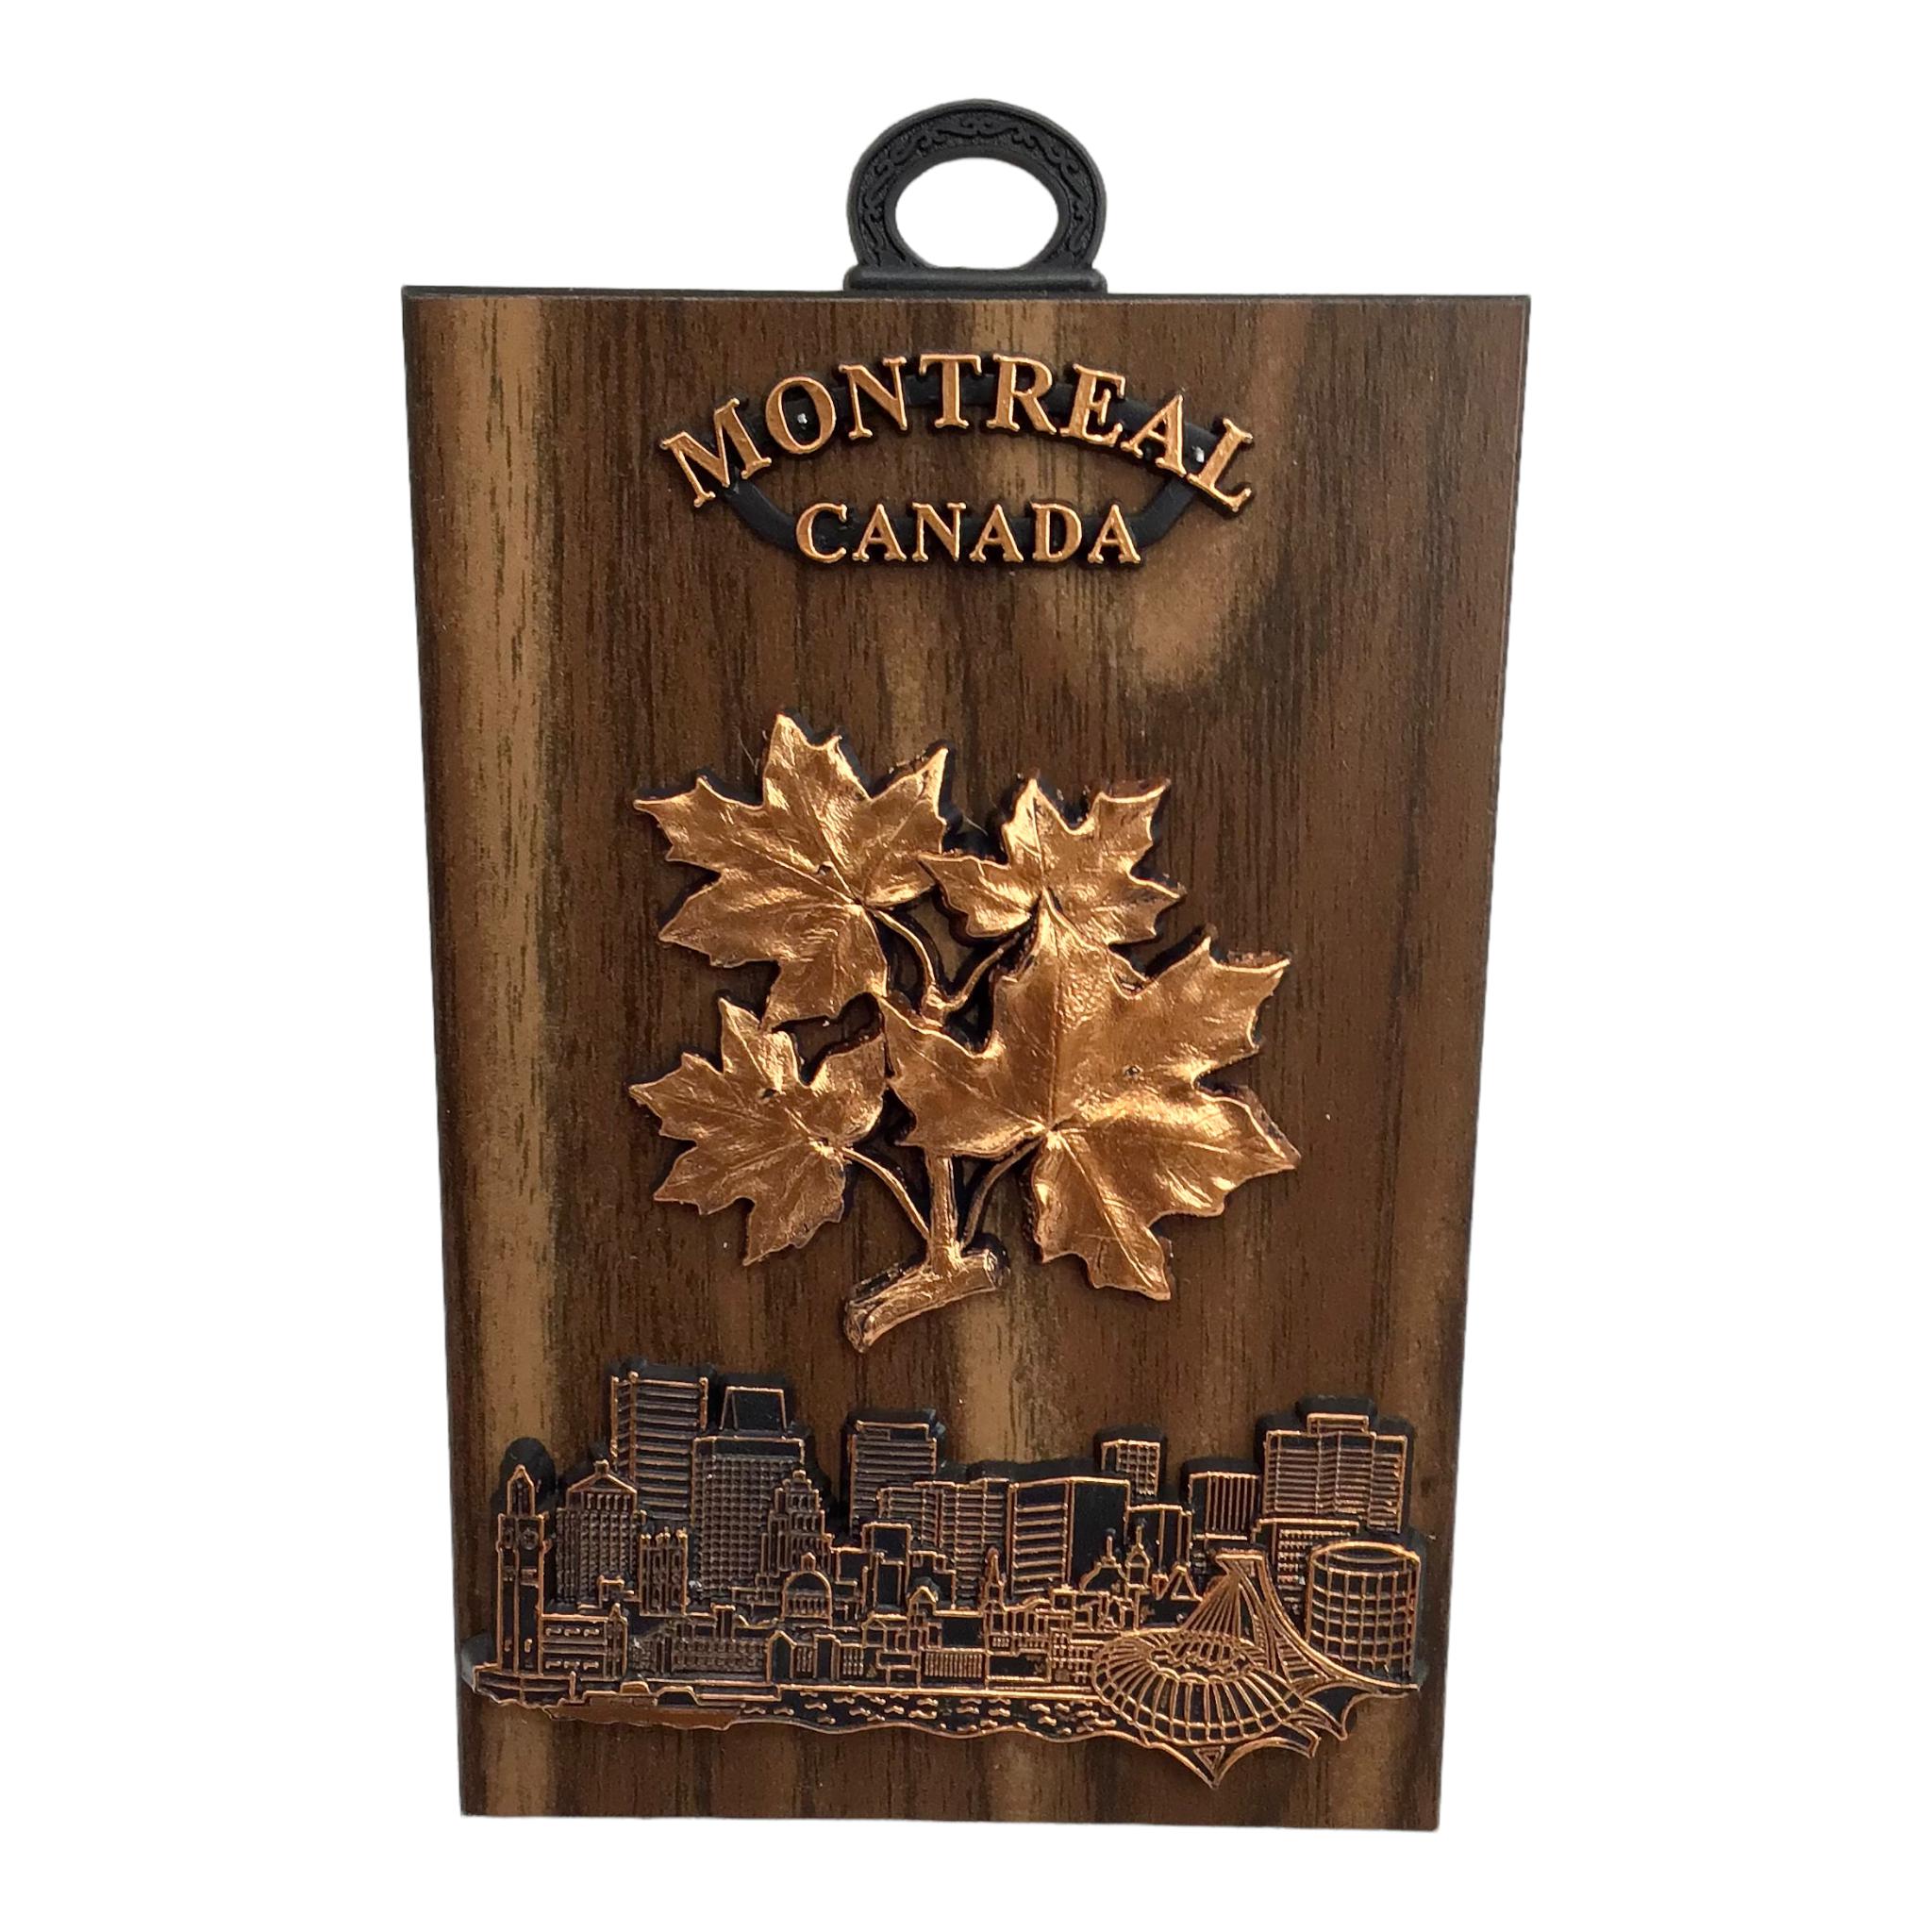 Canadian Maple Leaves Souvenir Wooden Wall Plaque Montreal Skyline Scene Figurine on Hickory 4”x6”